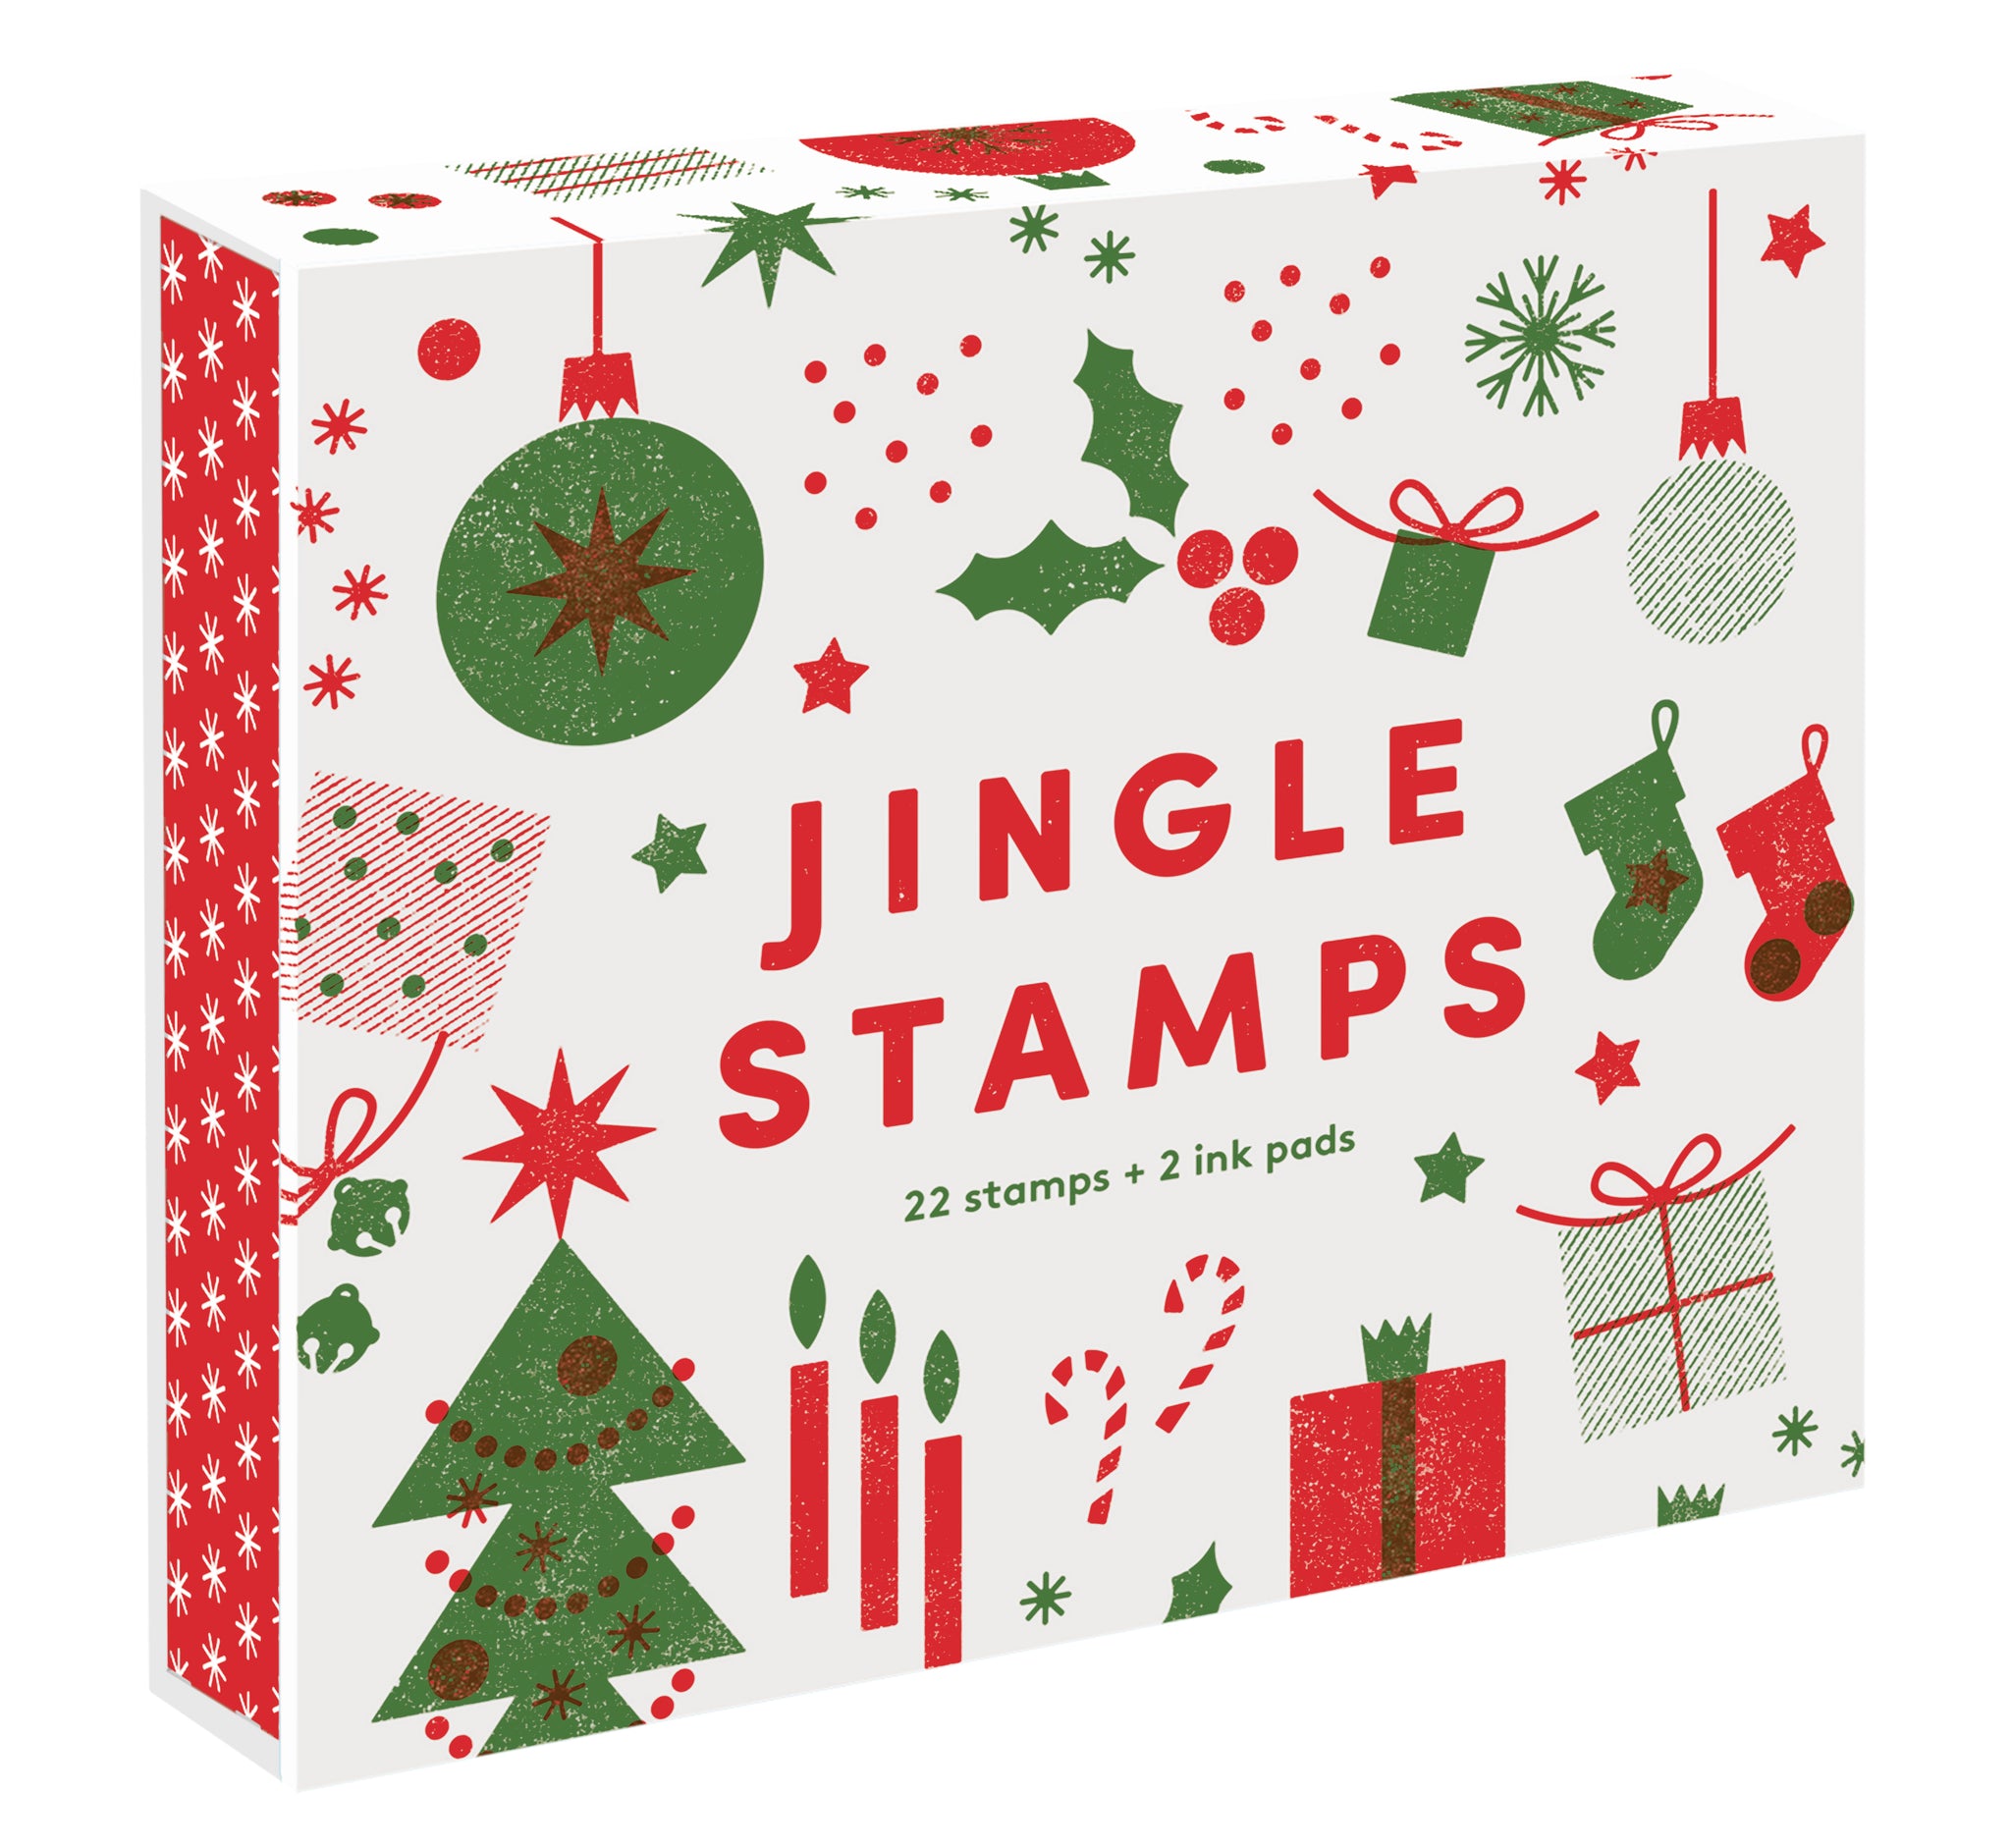 Jingle Stamps cover